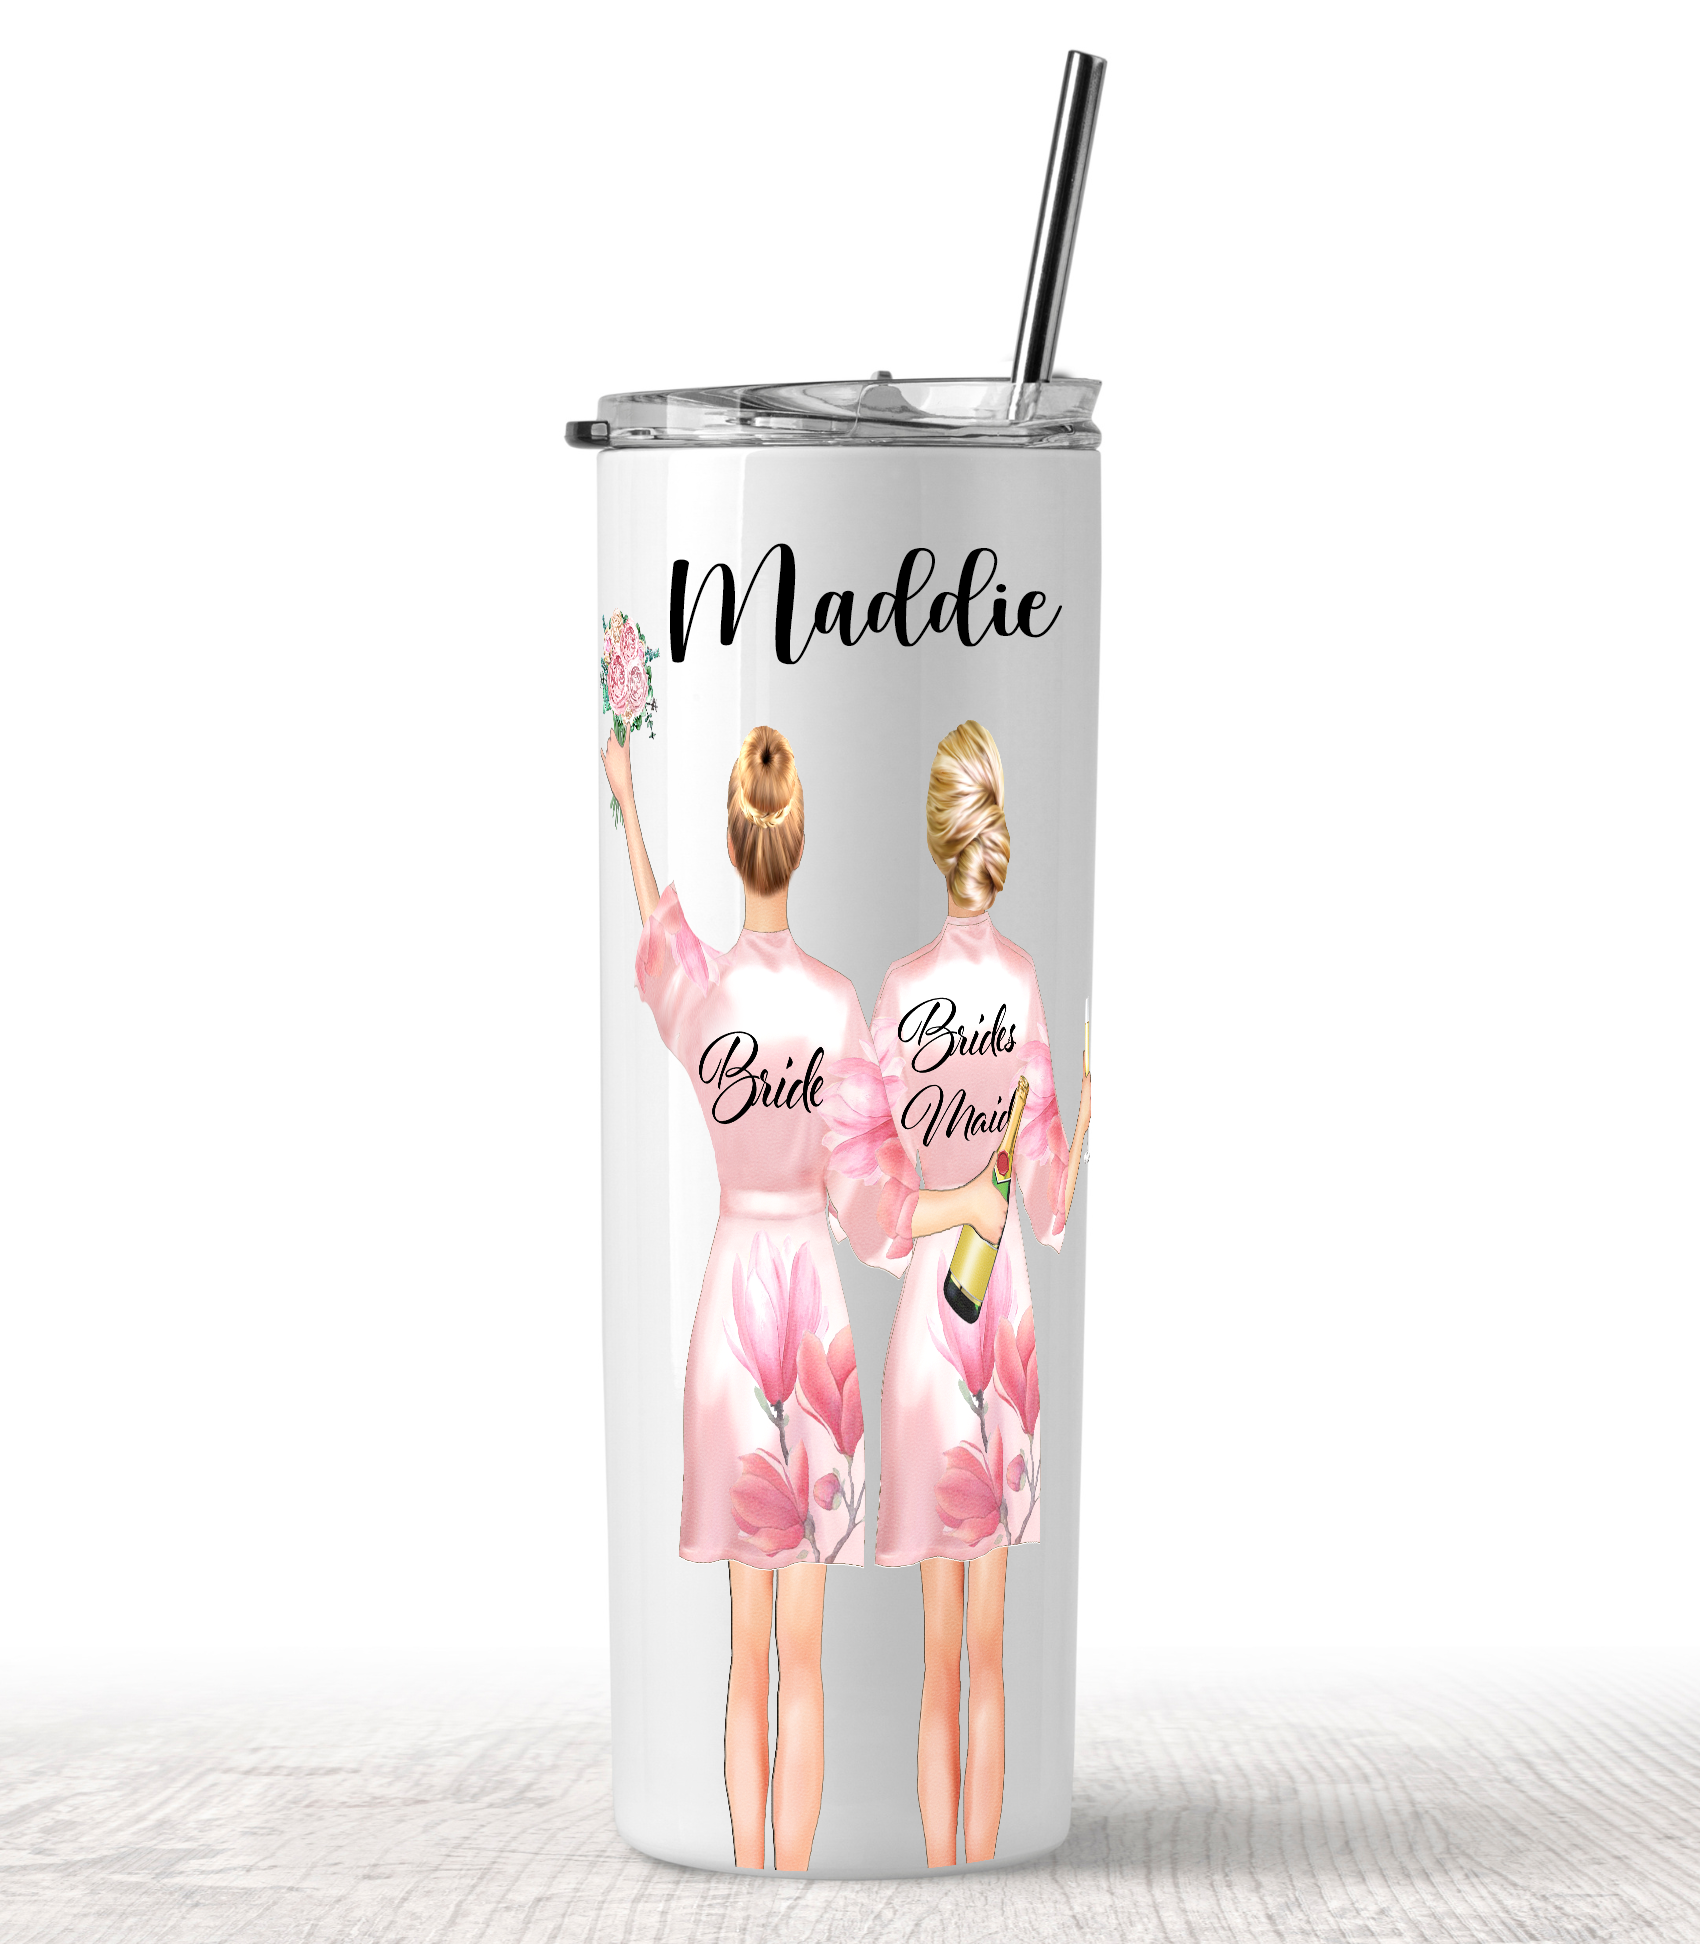 Bride Vibes and Bride Tribe Plastic Tumblers